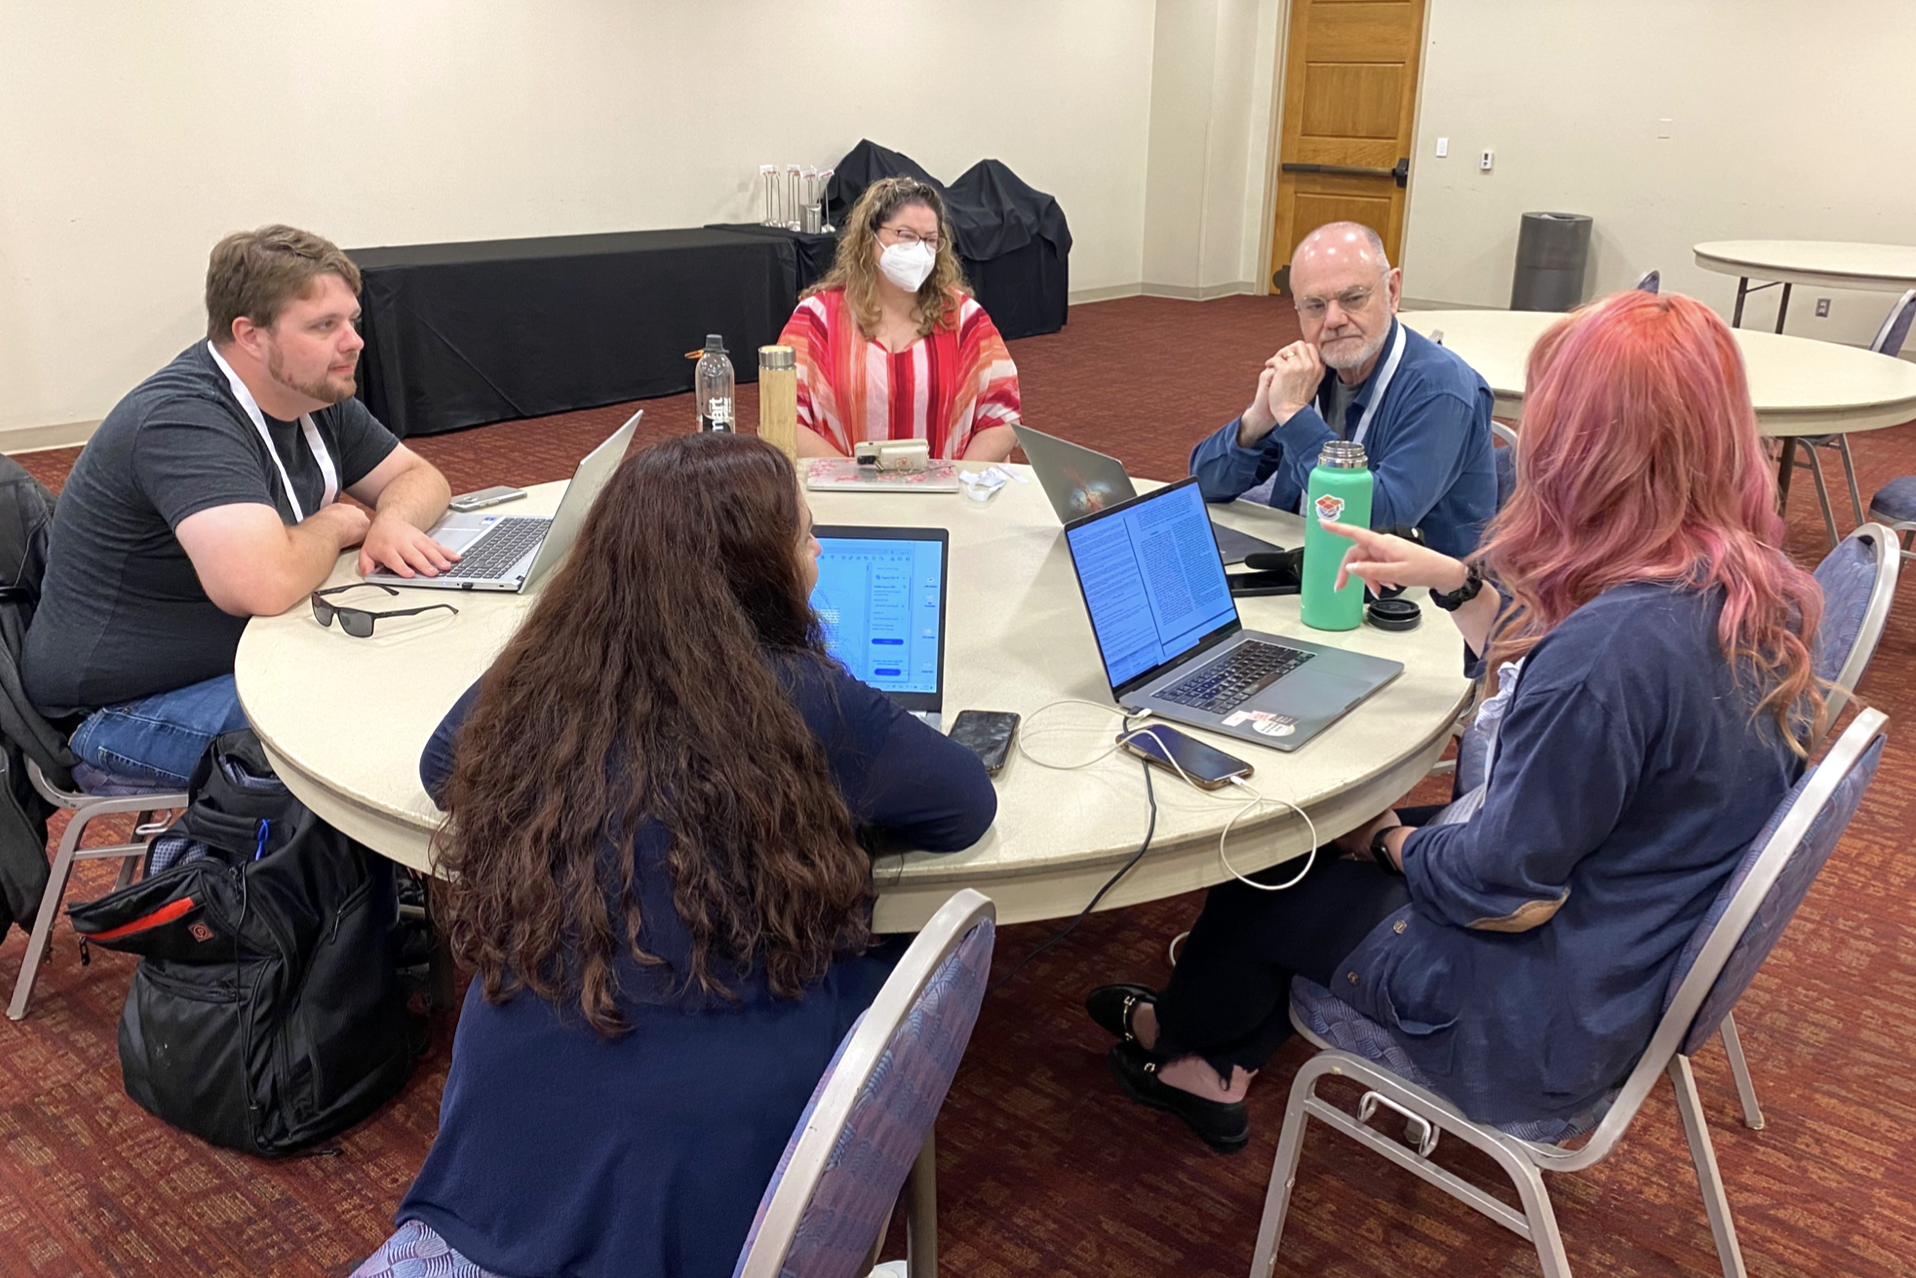 A group of people sits around a table discussing a peer review example.